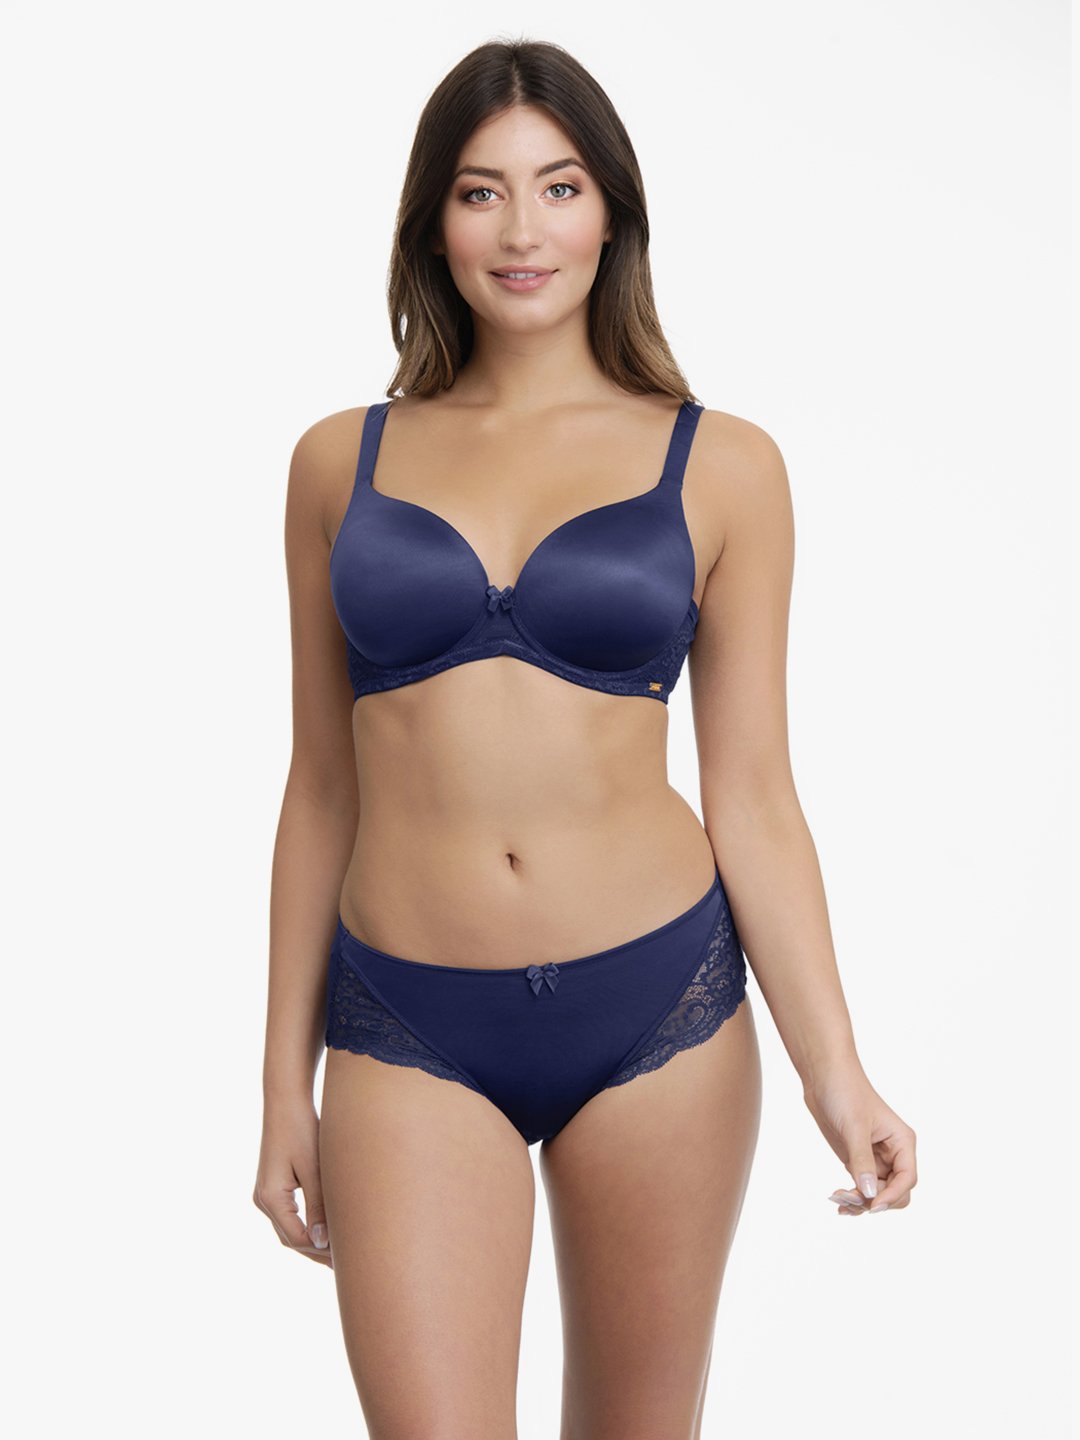 Ultimo Delicate Romance Low Rise Hipster - Inky Blue